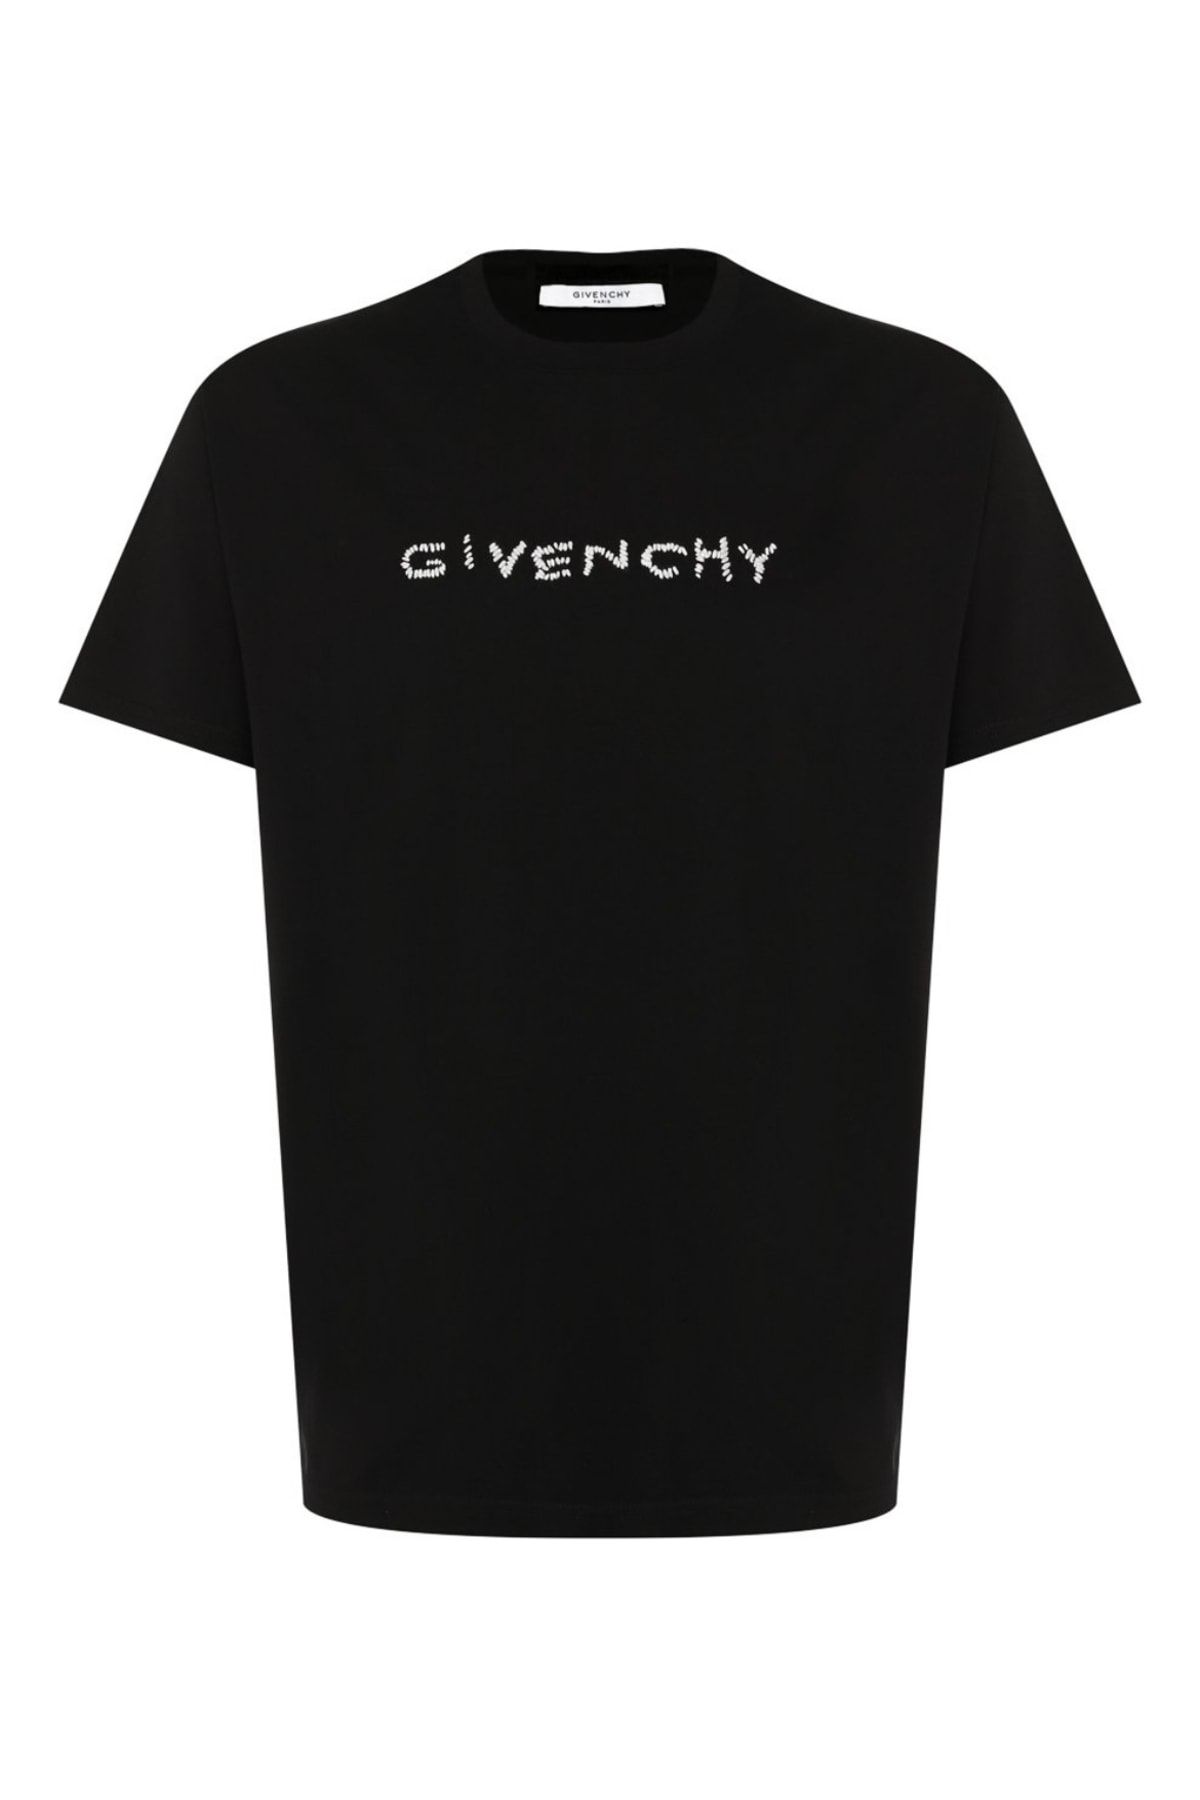 Givenchy Logo Embroidered T-shirt